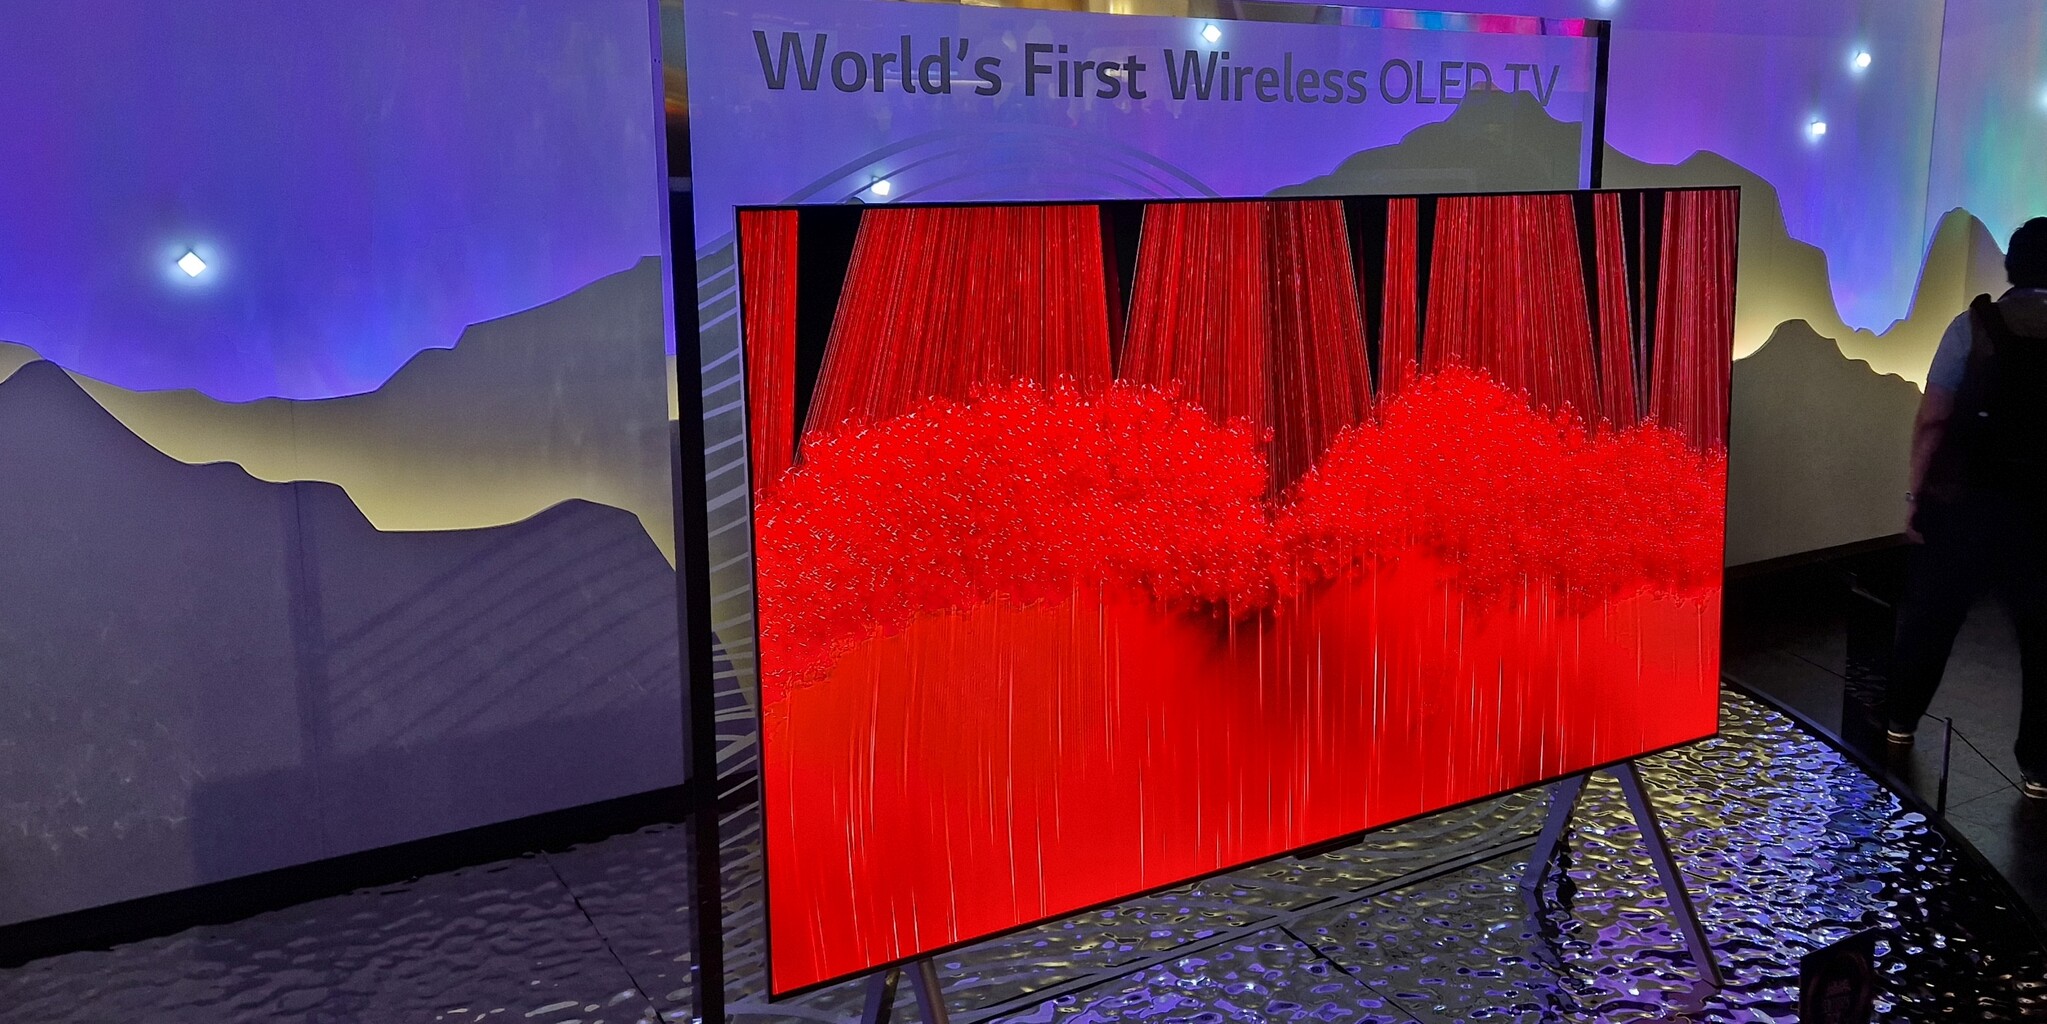 At LG Open Day, anyone can experience the world’s first wireless OLED TV